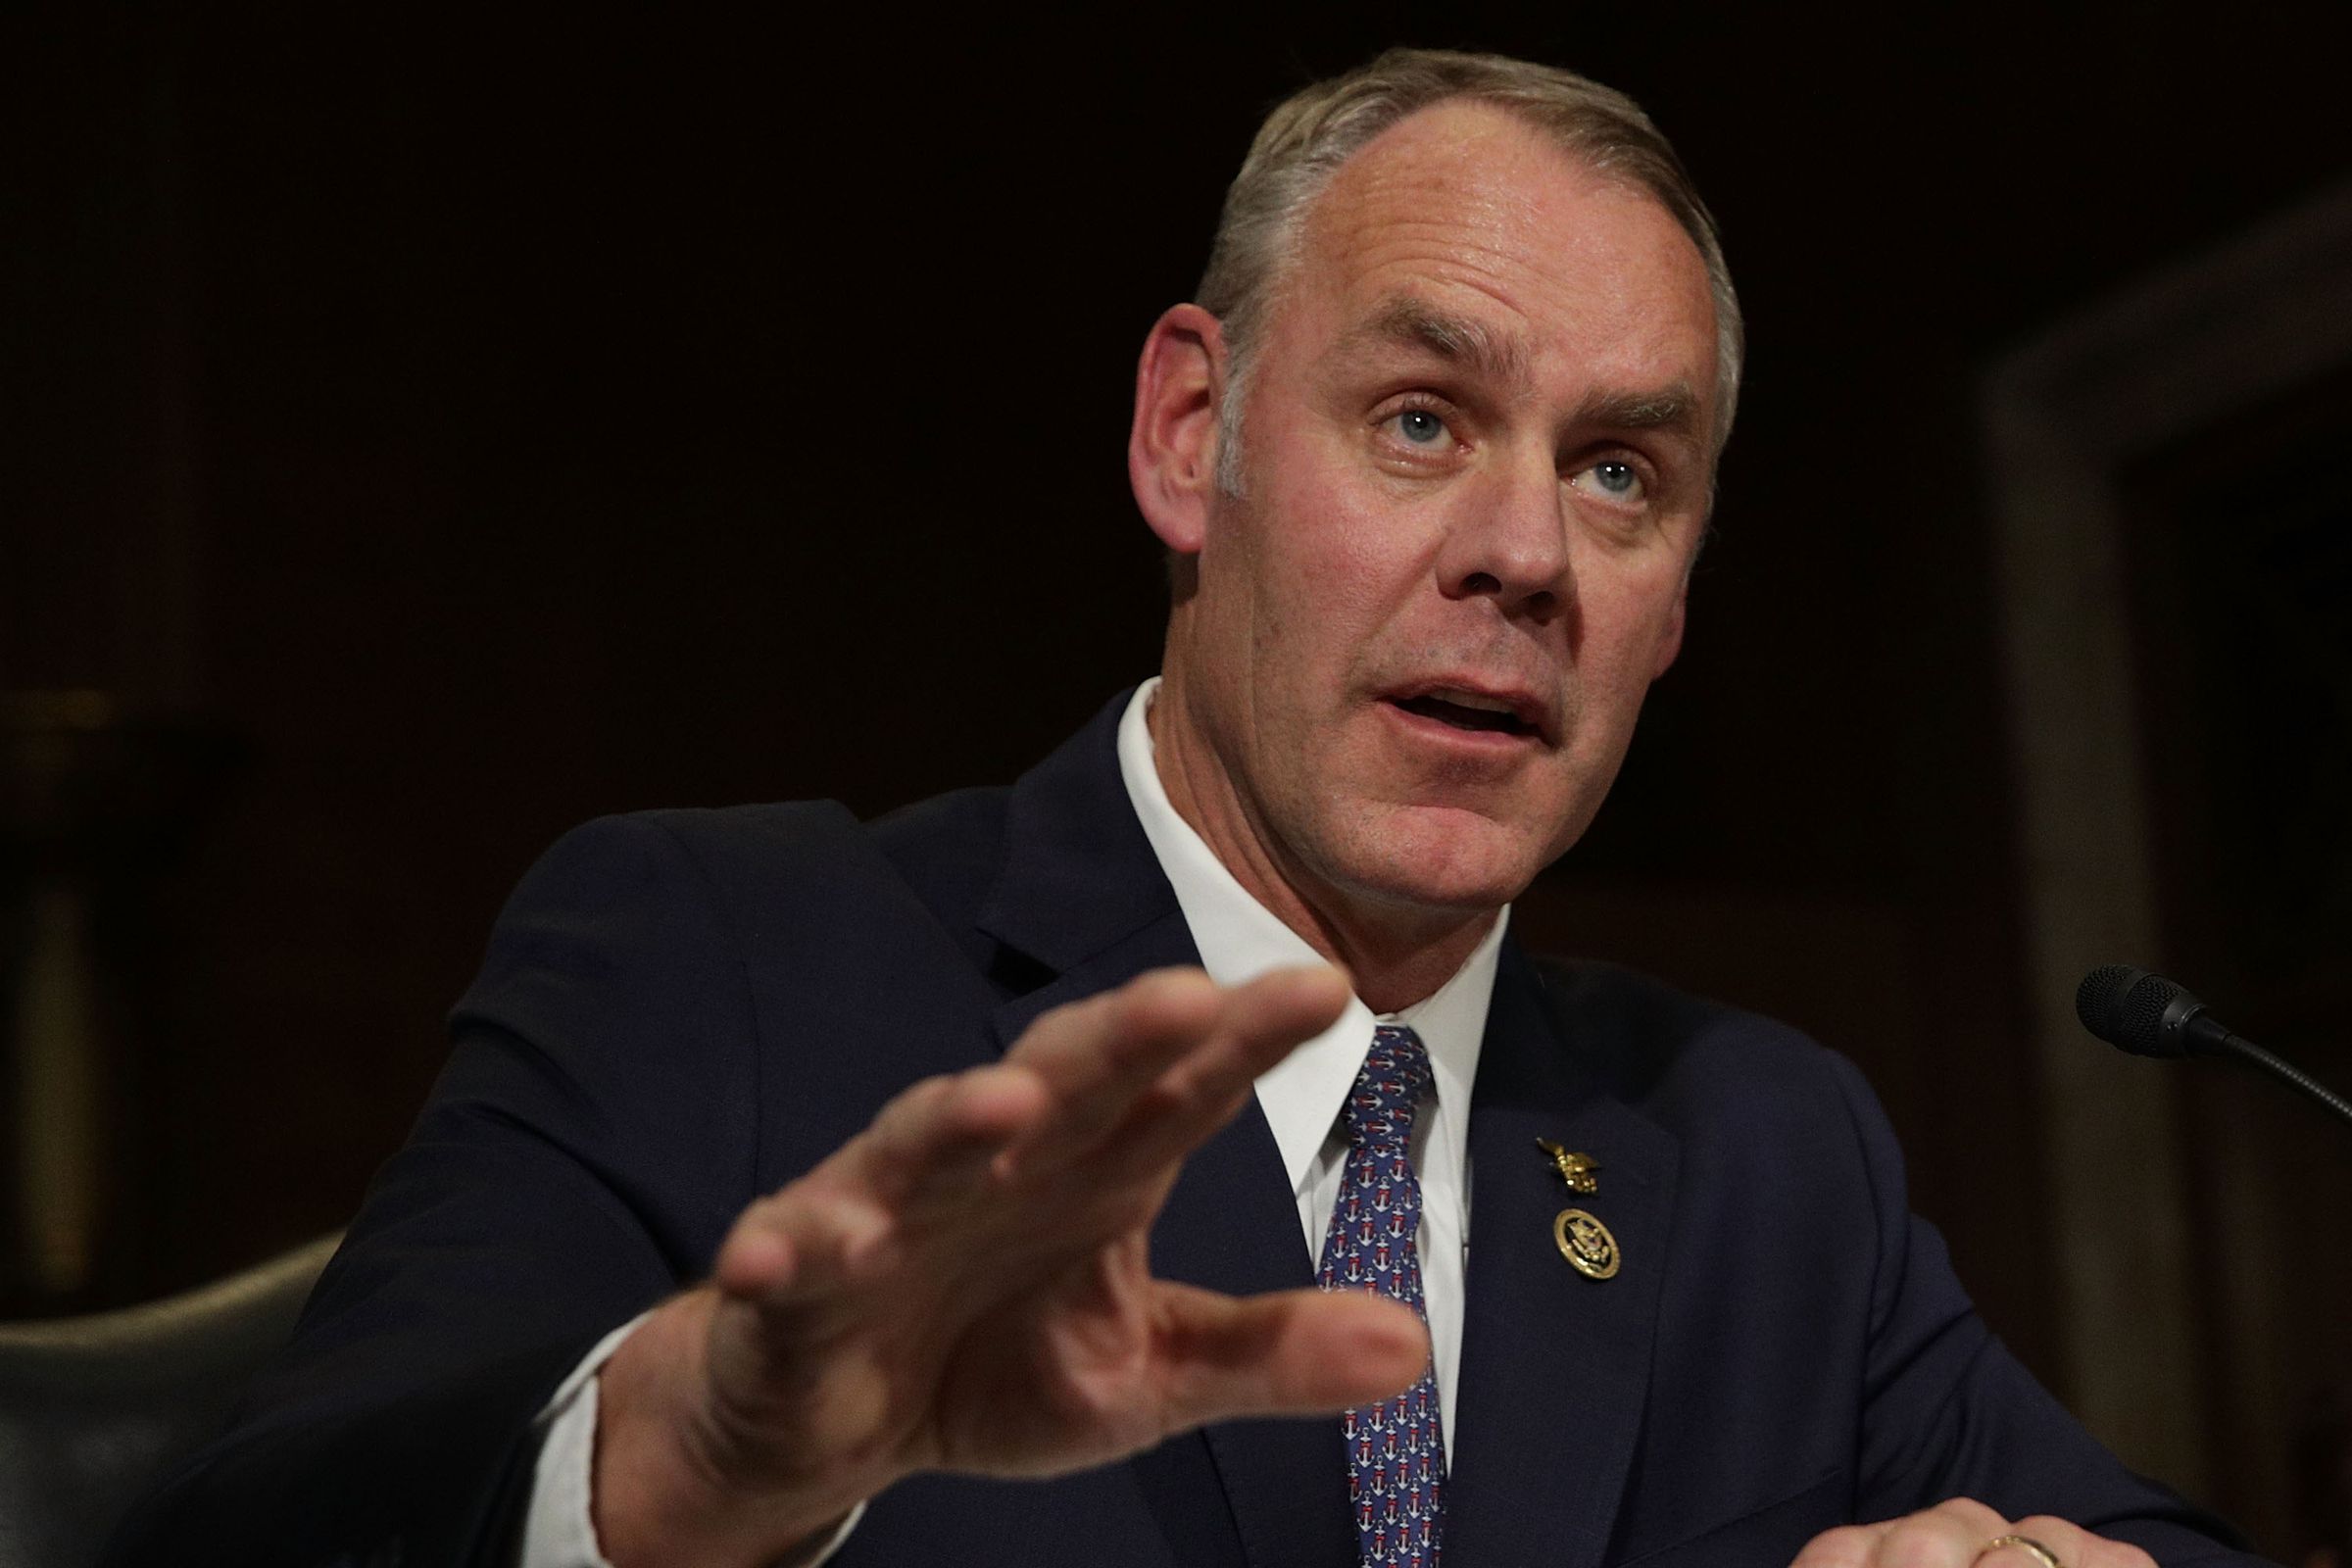 Confirmation Hearing Held For Ryan Zinke To Become Interior Secretary Under Trump